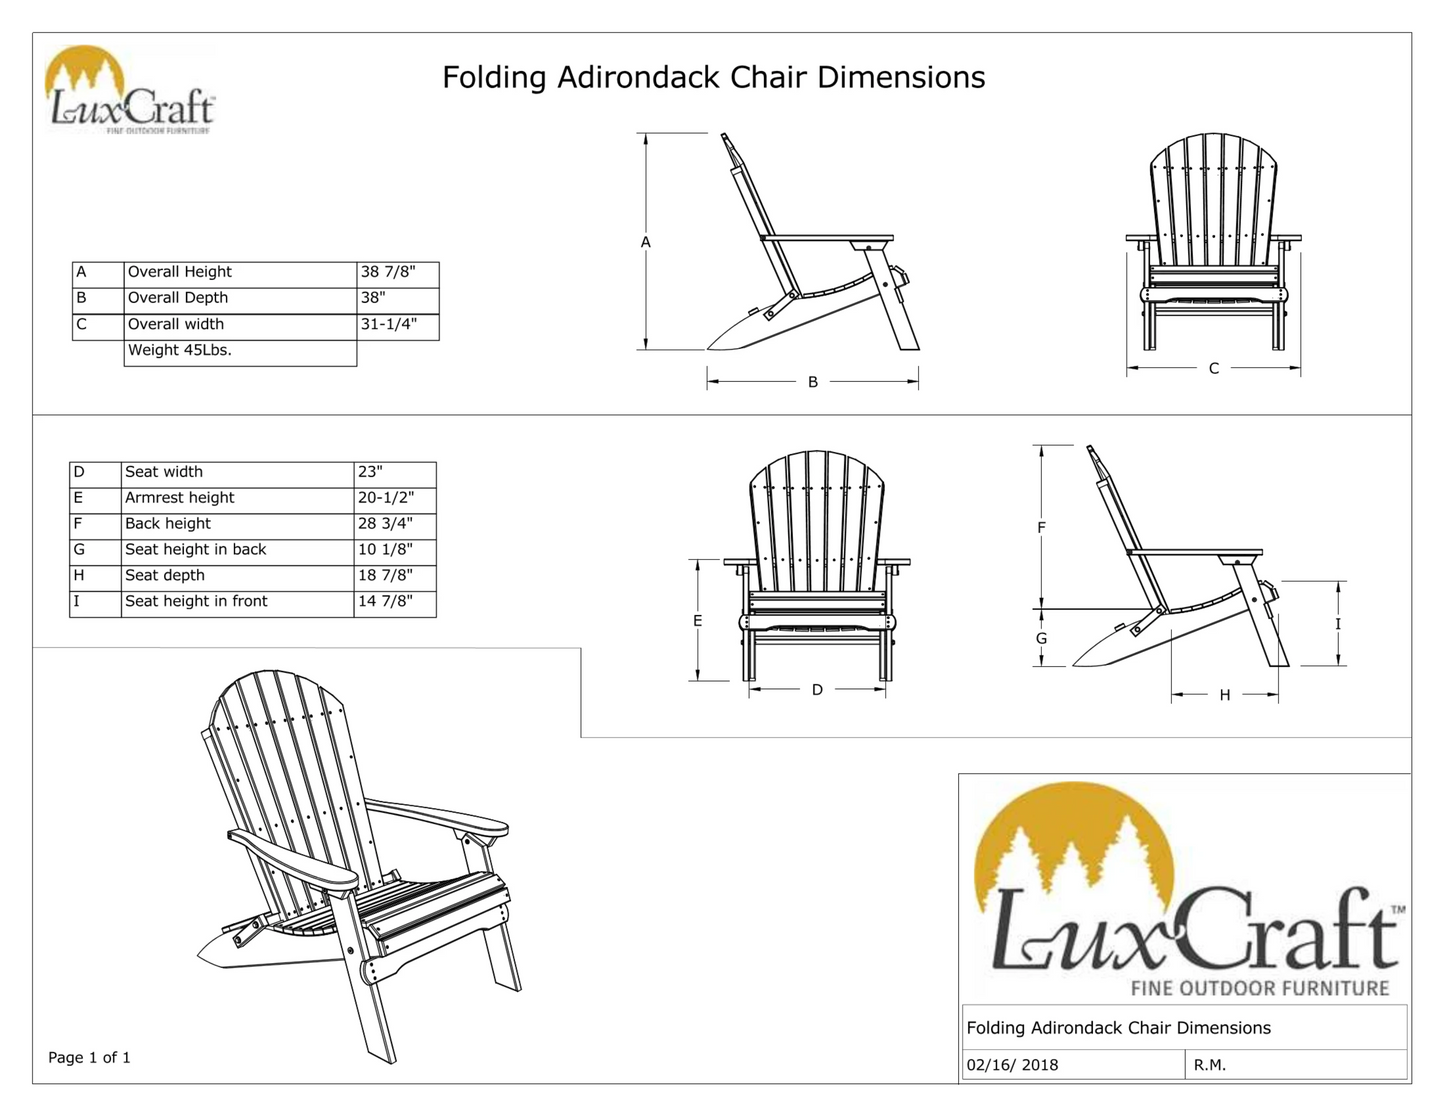 LuxCraft Recycled Plastic Folding Adirondack Chair  - LEAD TIME TO SHIP 10 to 12 BUSINESS DAYS